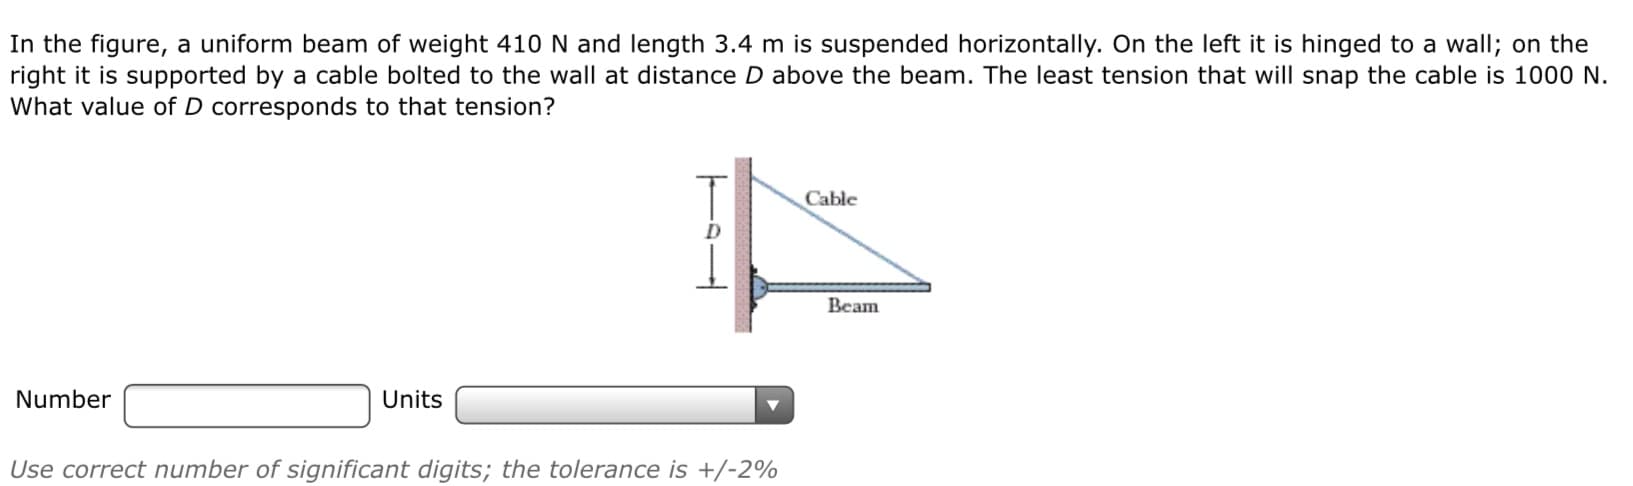 In the figure, a uniform beam of weight 410 N and length 3.4 m is suspended horizontally. On the left it is hinged to a wall; on the
right it is supported by a cable bolted to the wall at distance D above the beam. The least tension that will snap the cable is 1000 N.
What value of D corresponds to that tension?
Cable
Beam
Number
Units
Use correct number of significant digits; the tolerance is +/-2%
